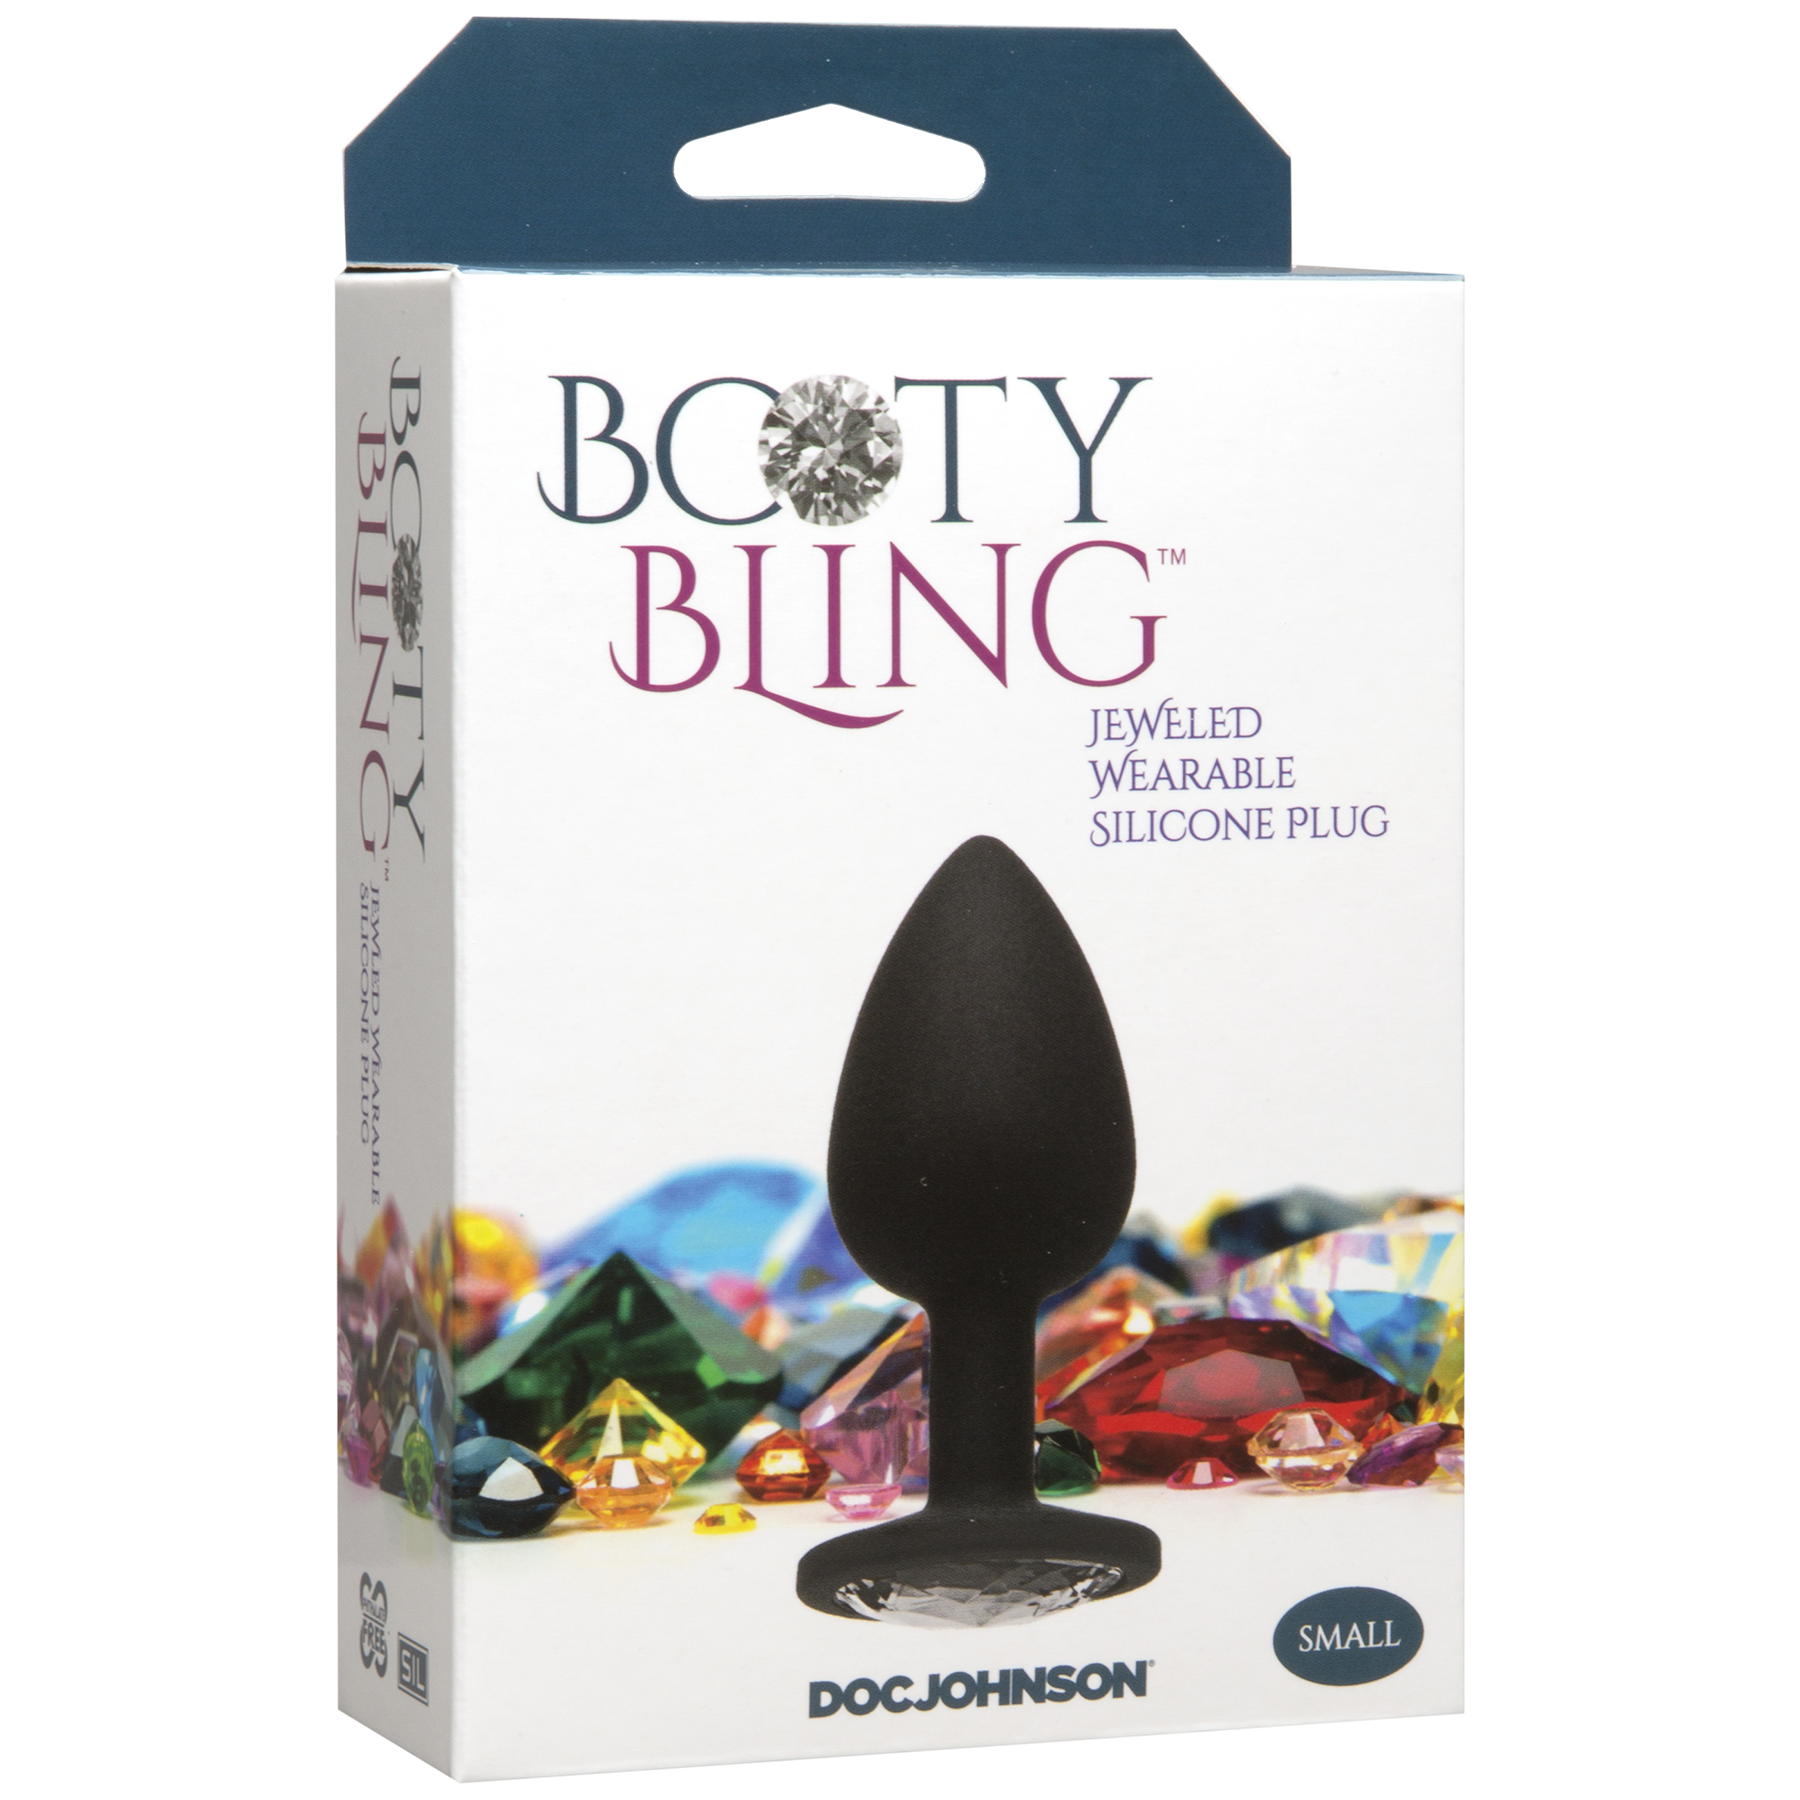 Booty Bling Plug - Silver, Small - Thorn & Feather Sex Toy Canada